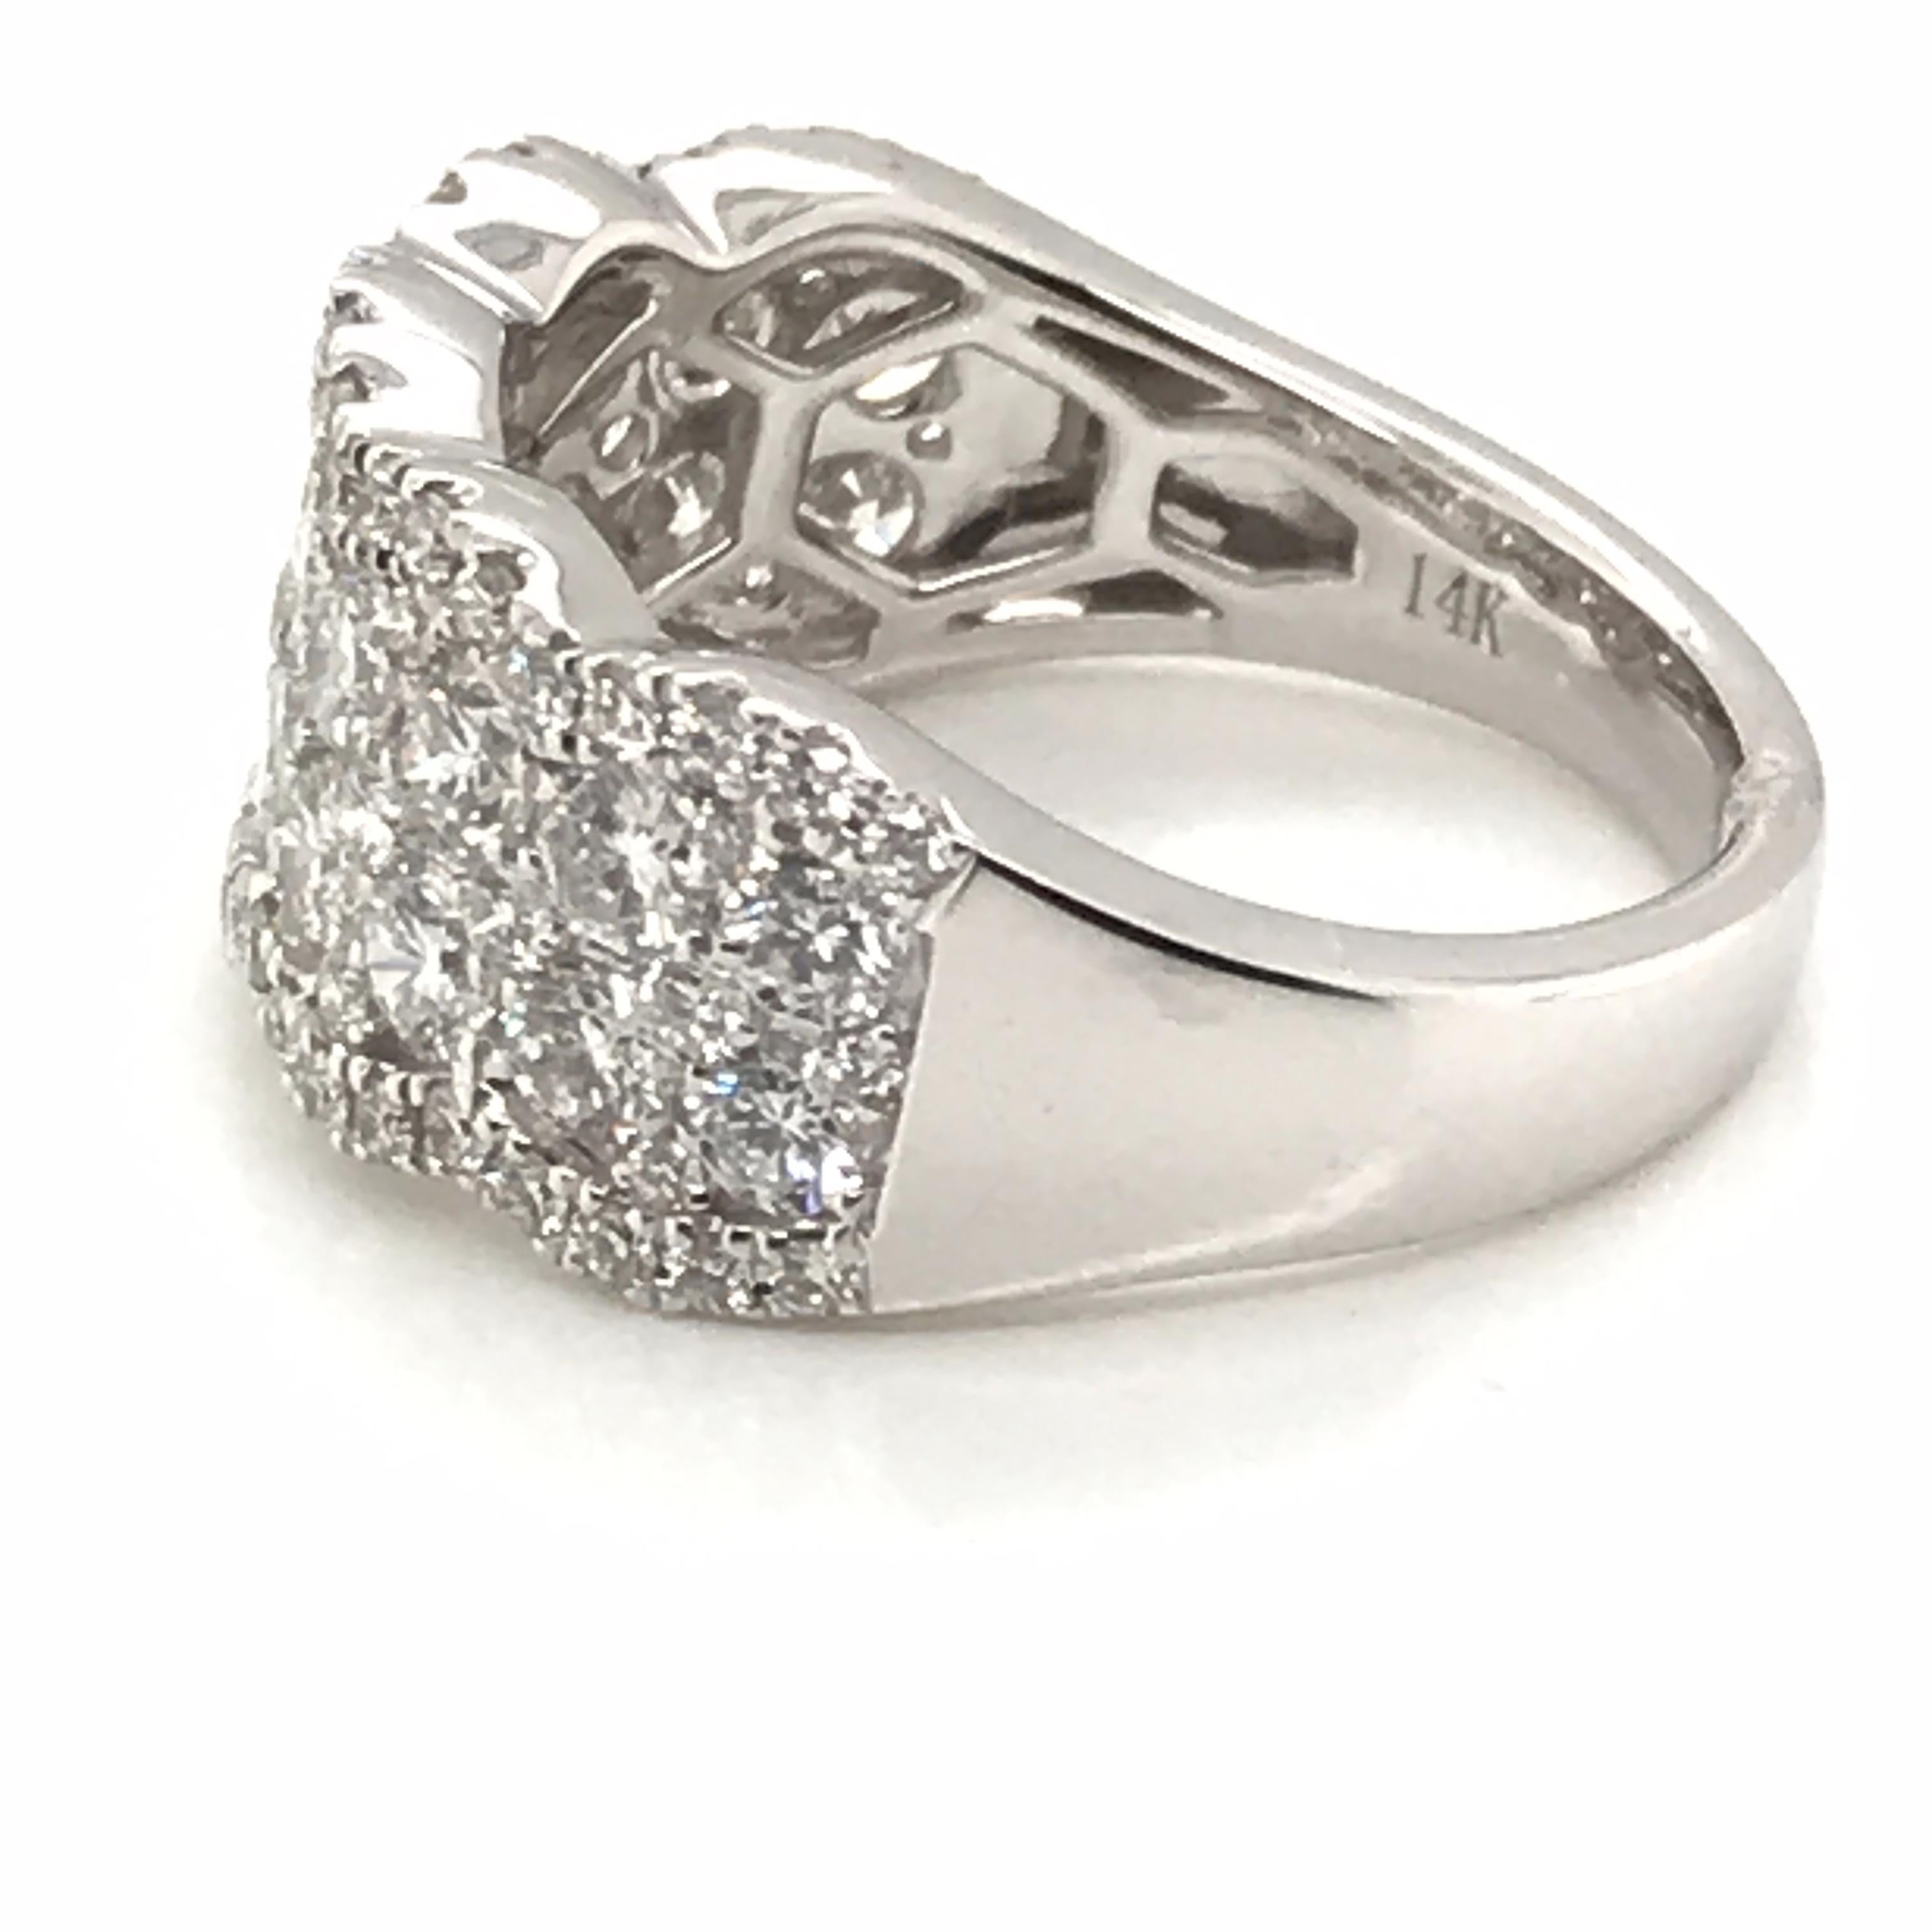 1.85 Carat Round White Diamond Ring In New Condition For Sale In New York, NY